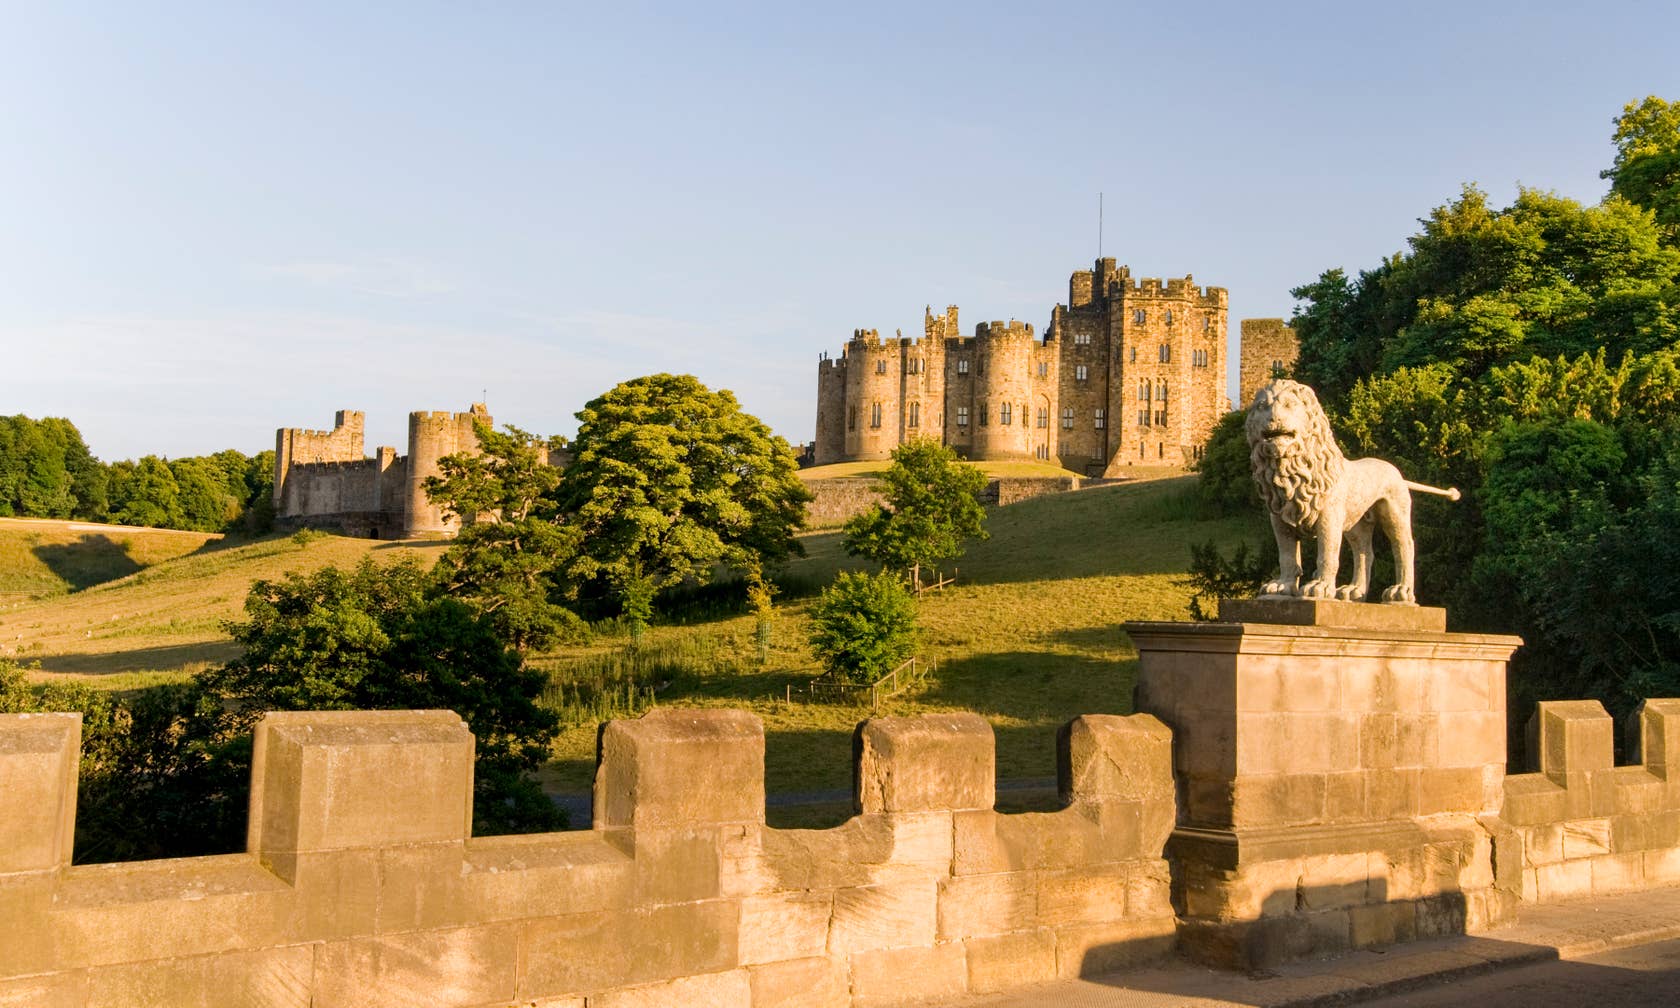 Holiday rentals in Alnwick